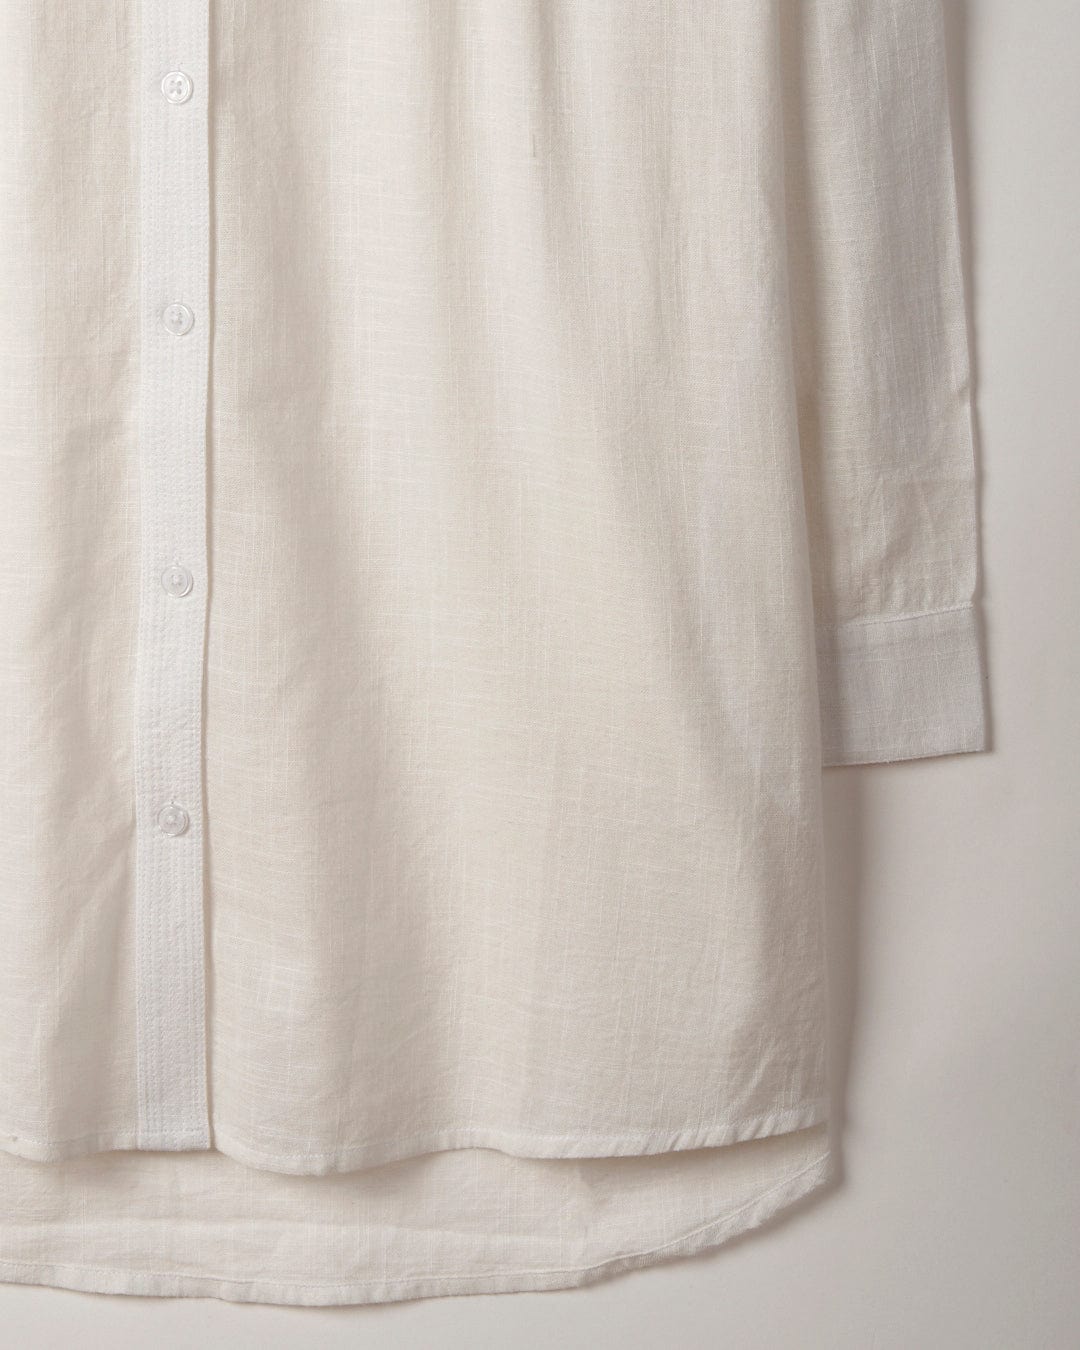 Close-up of a Saltrock Karthi - Womens Long Sleeve Shirt - White with visible texture, focusing on the button placket and hem.